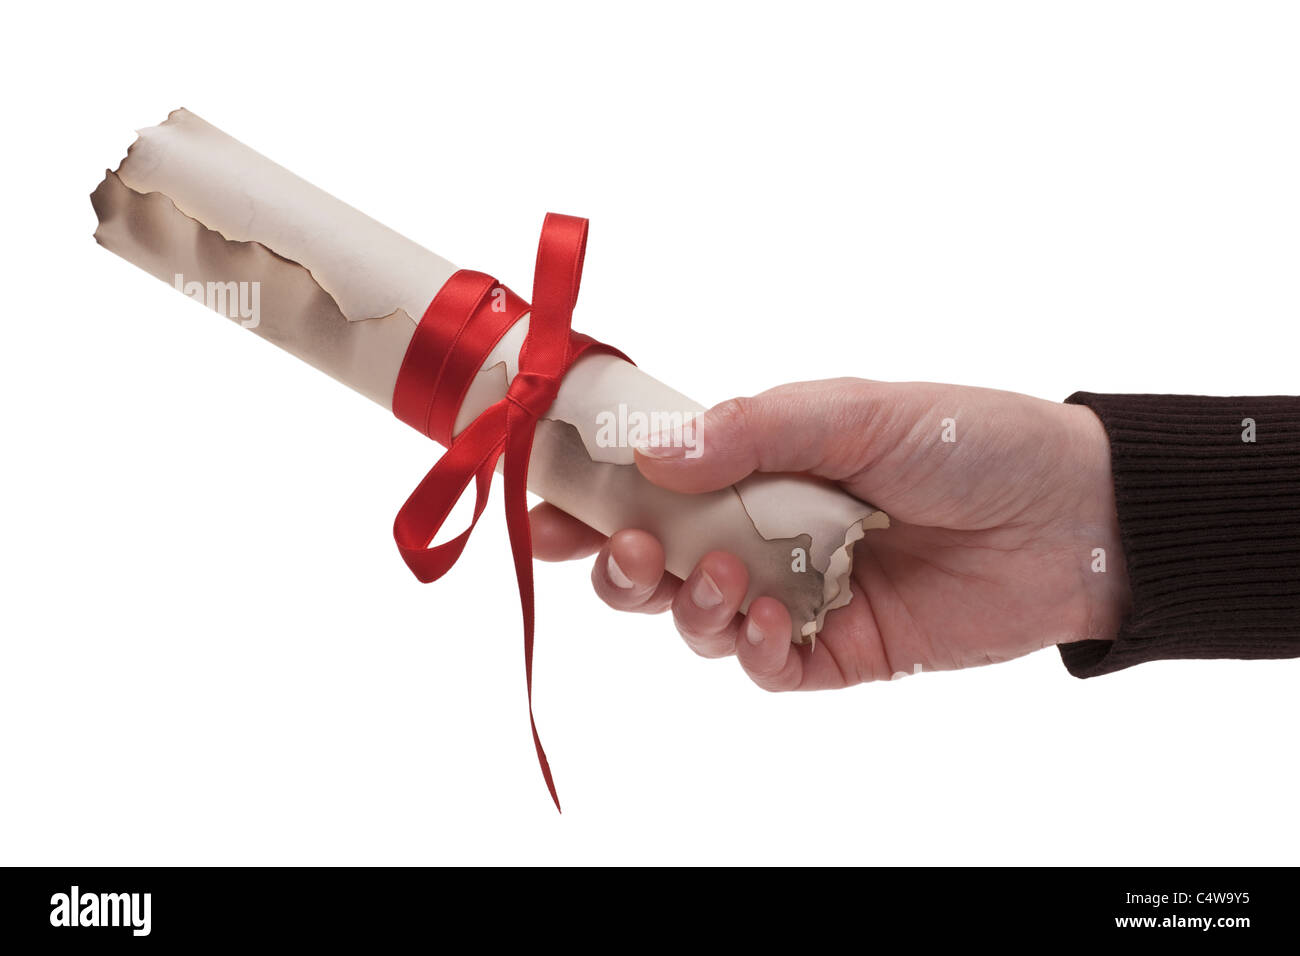 a old paper roll with a red lanyard is hand-held, background white Stock Photo